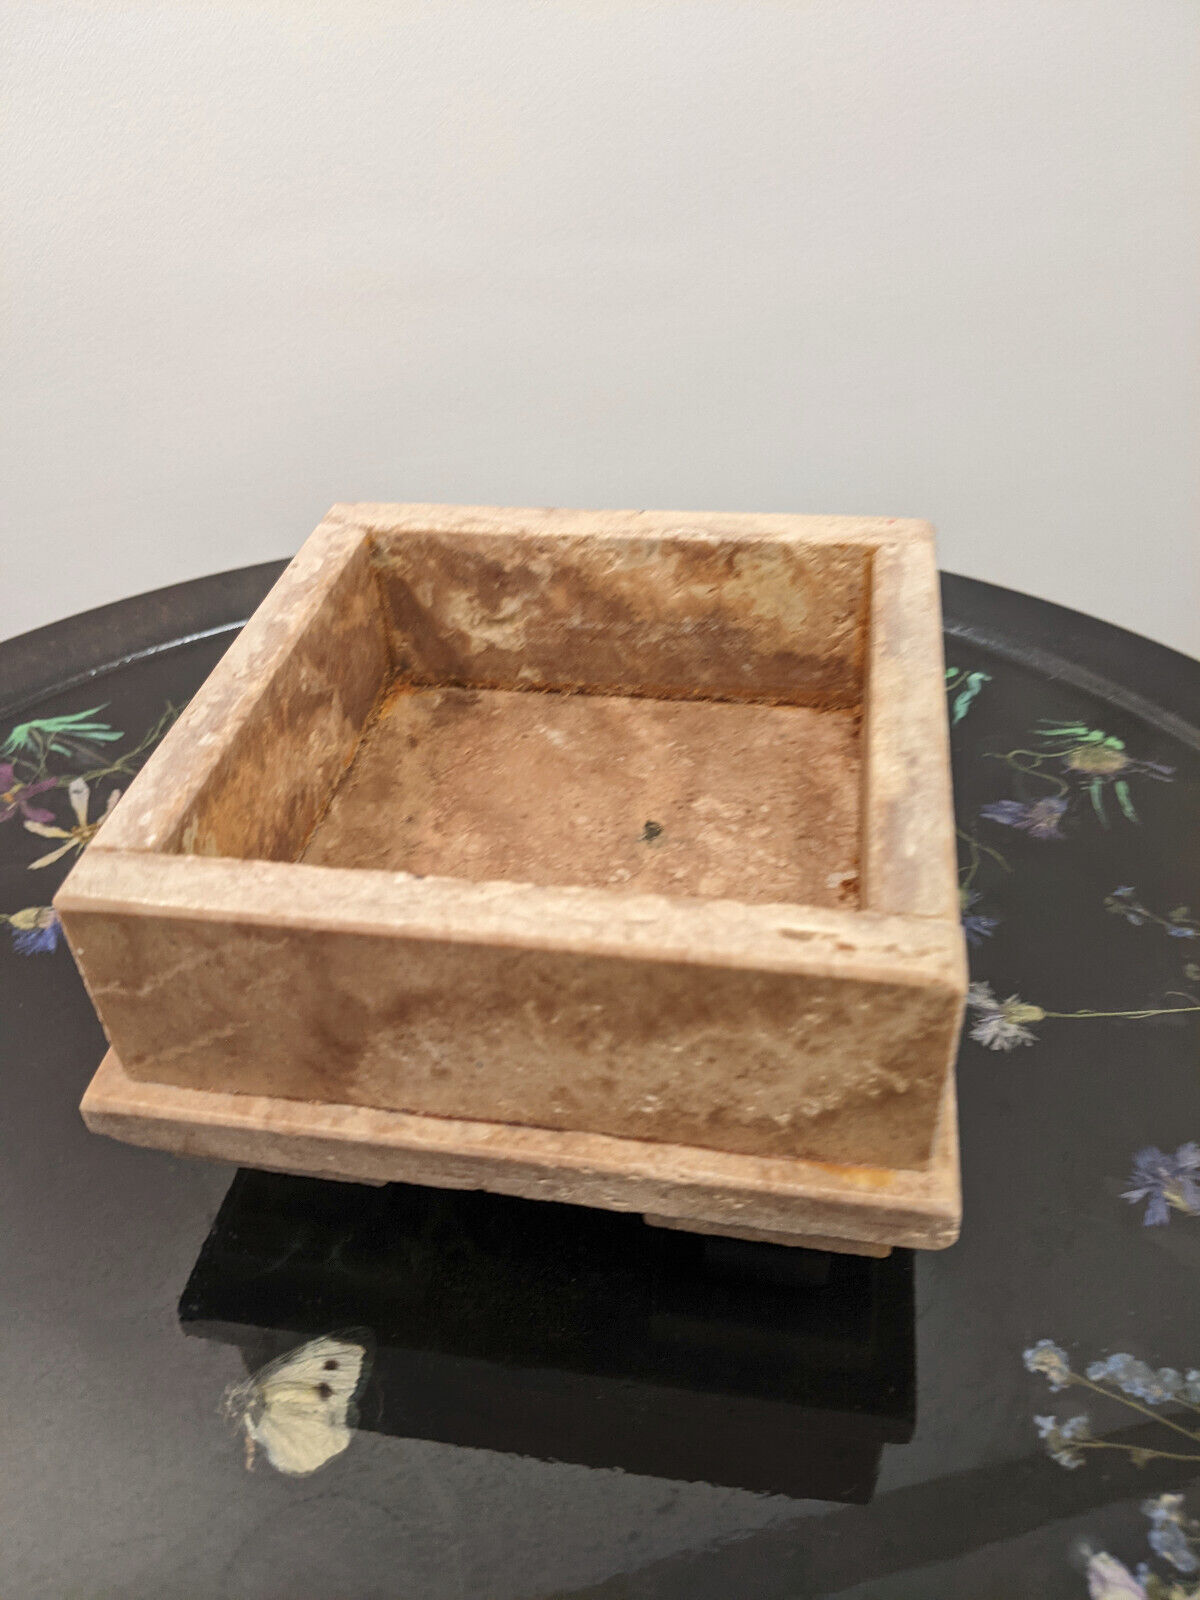 Travertine Marble Square Candle Holder /Console Dish 4 x 4